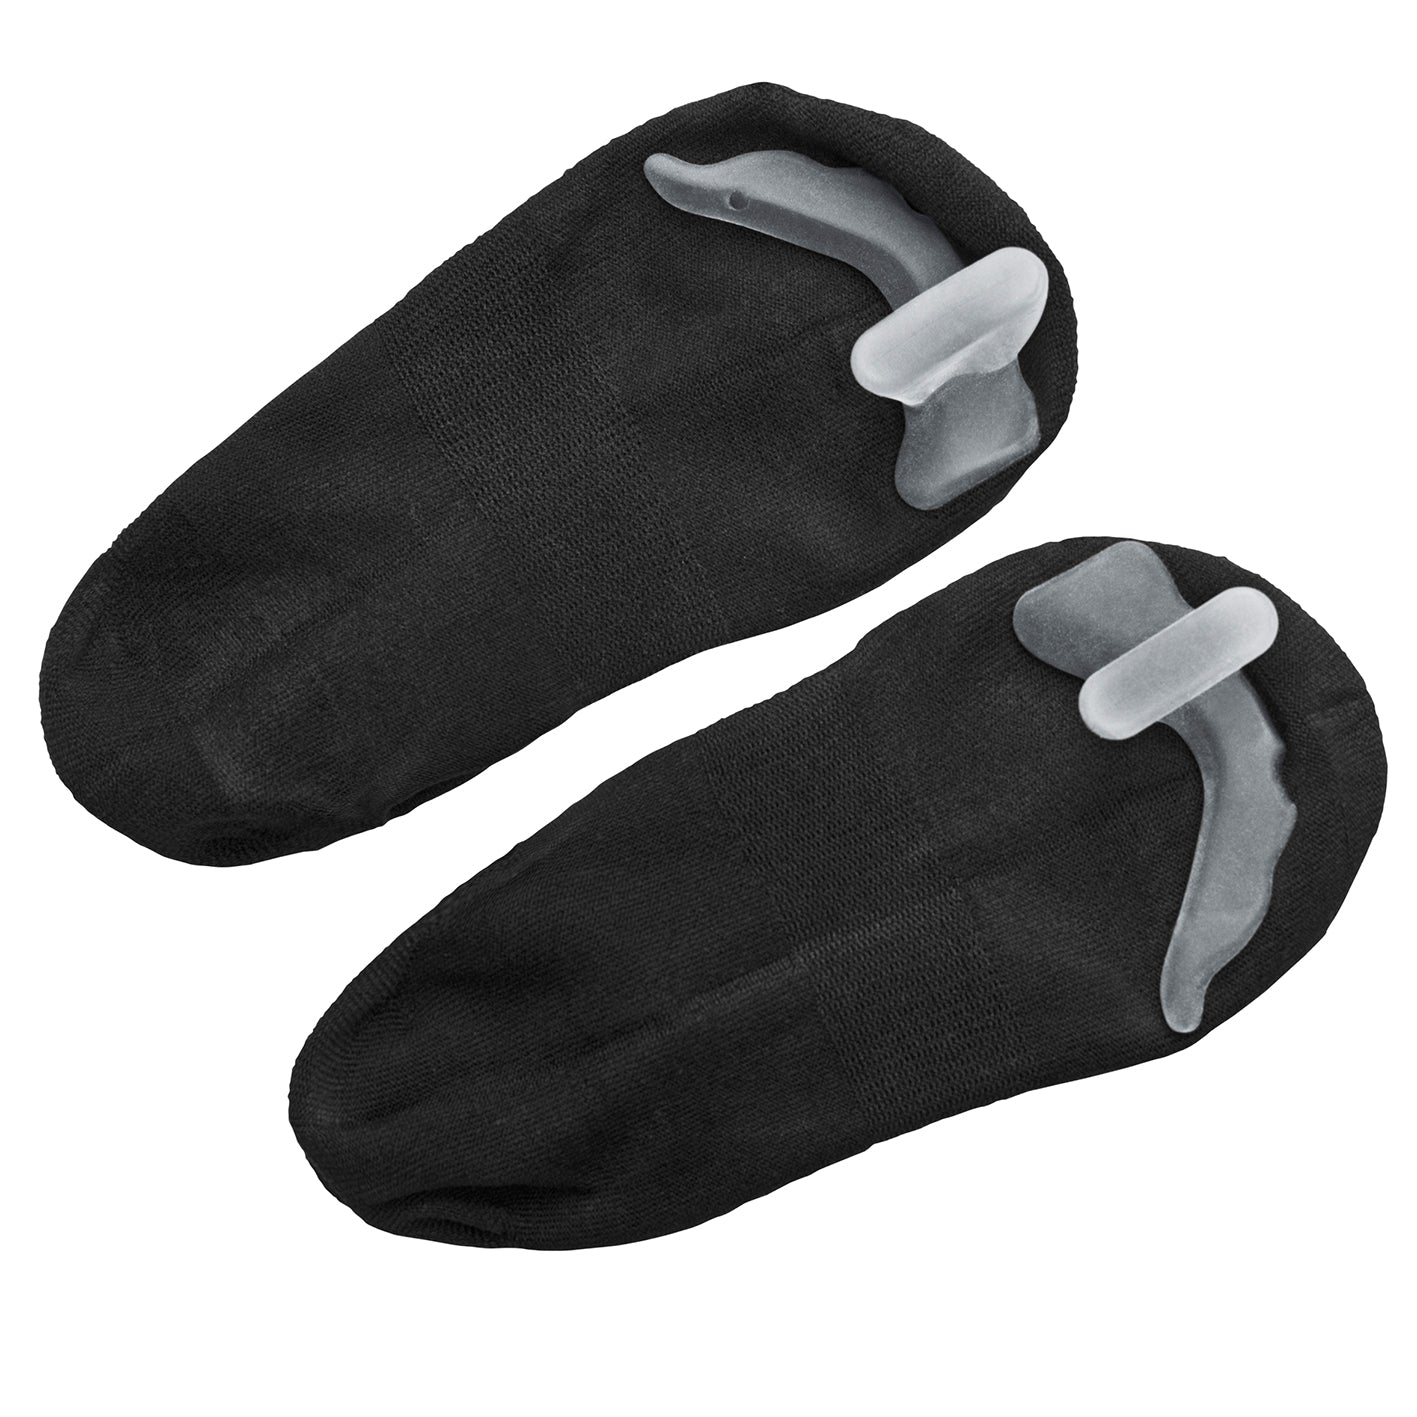 Gobunion Hallux Fütlinge with integrated toe spreader, size 35-38